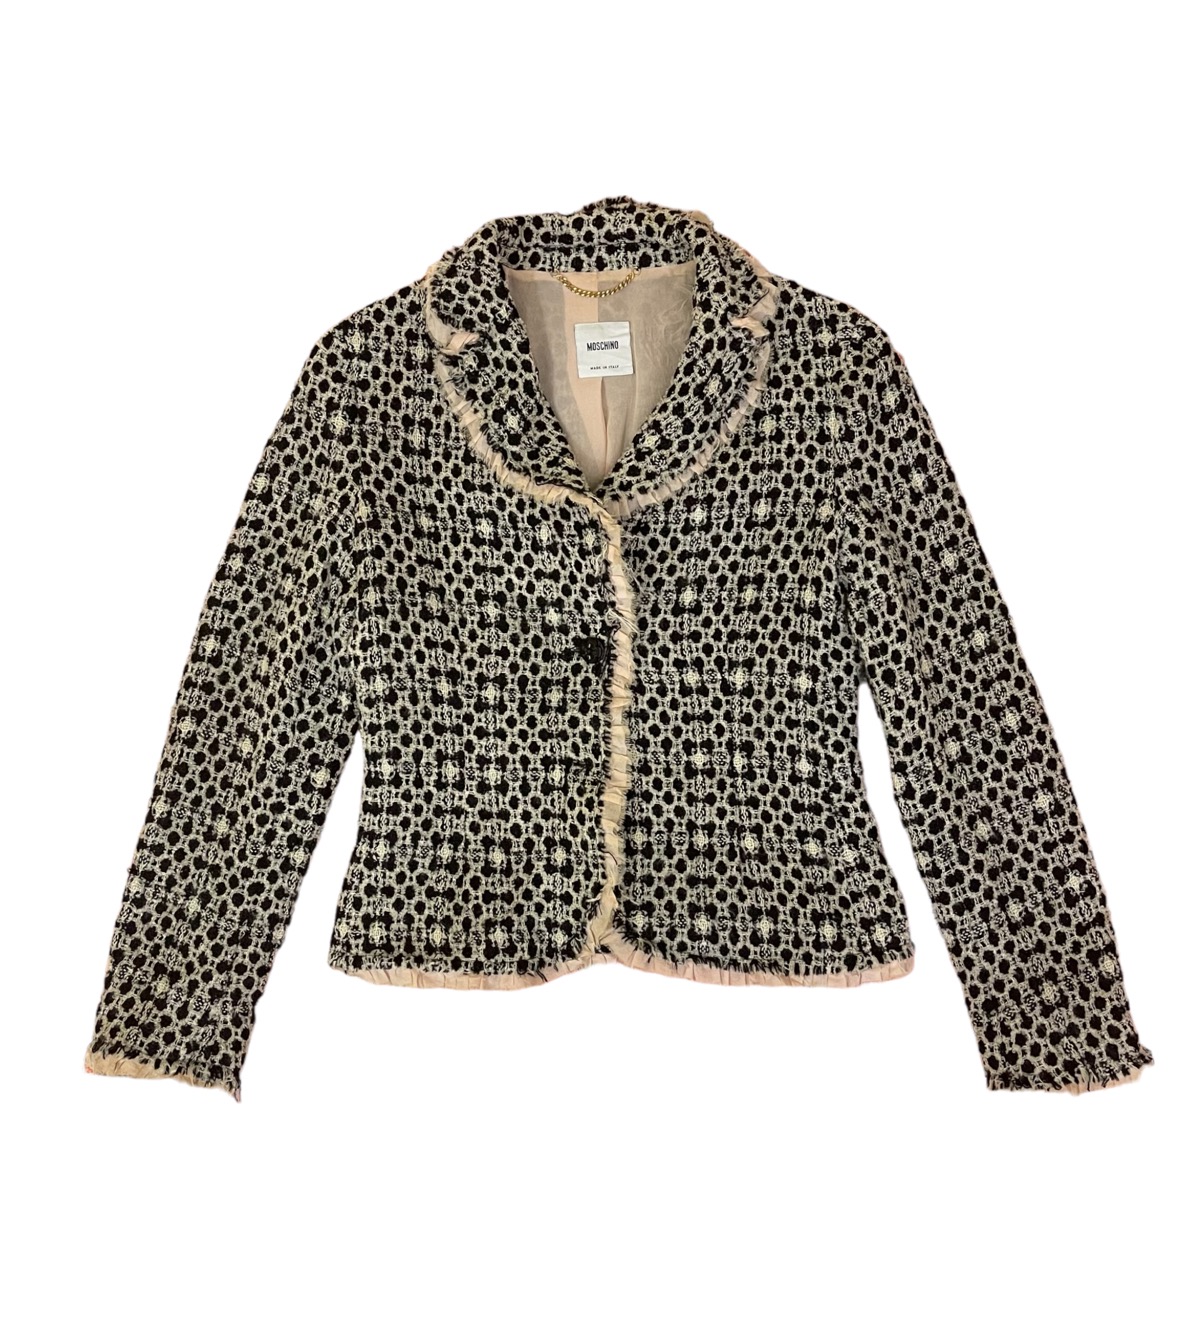 Moschino women jacket made in italy - 1